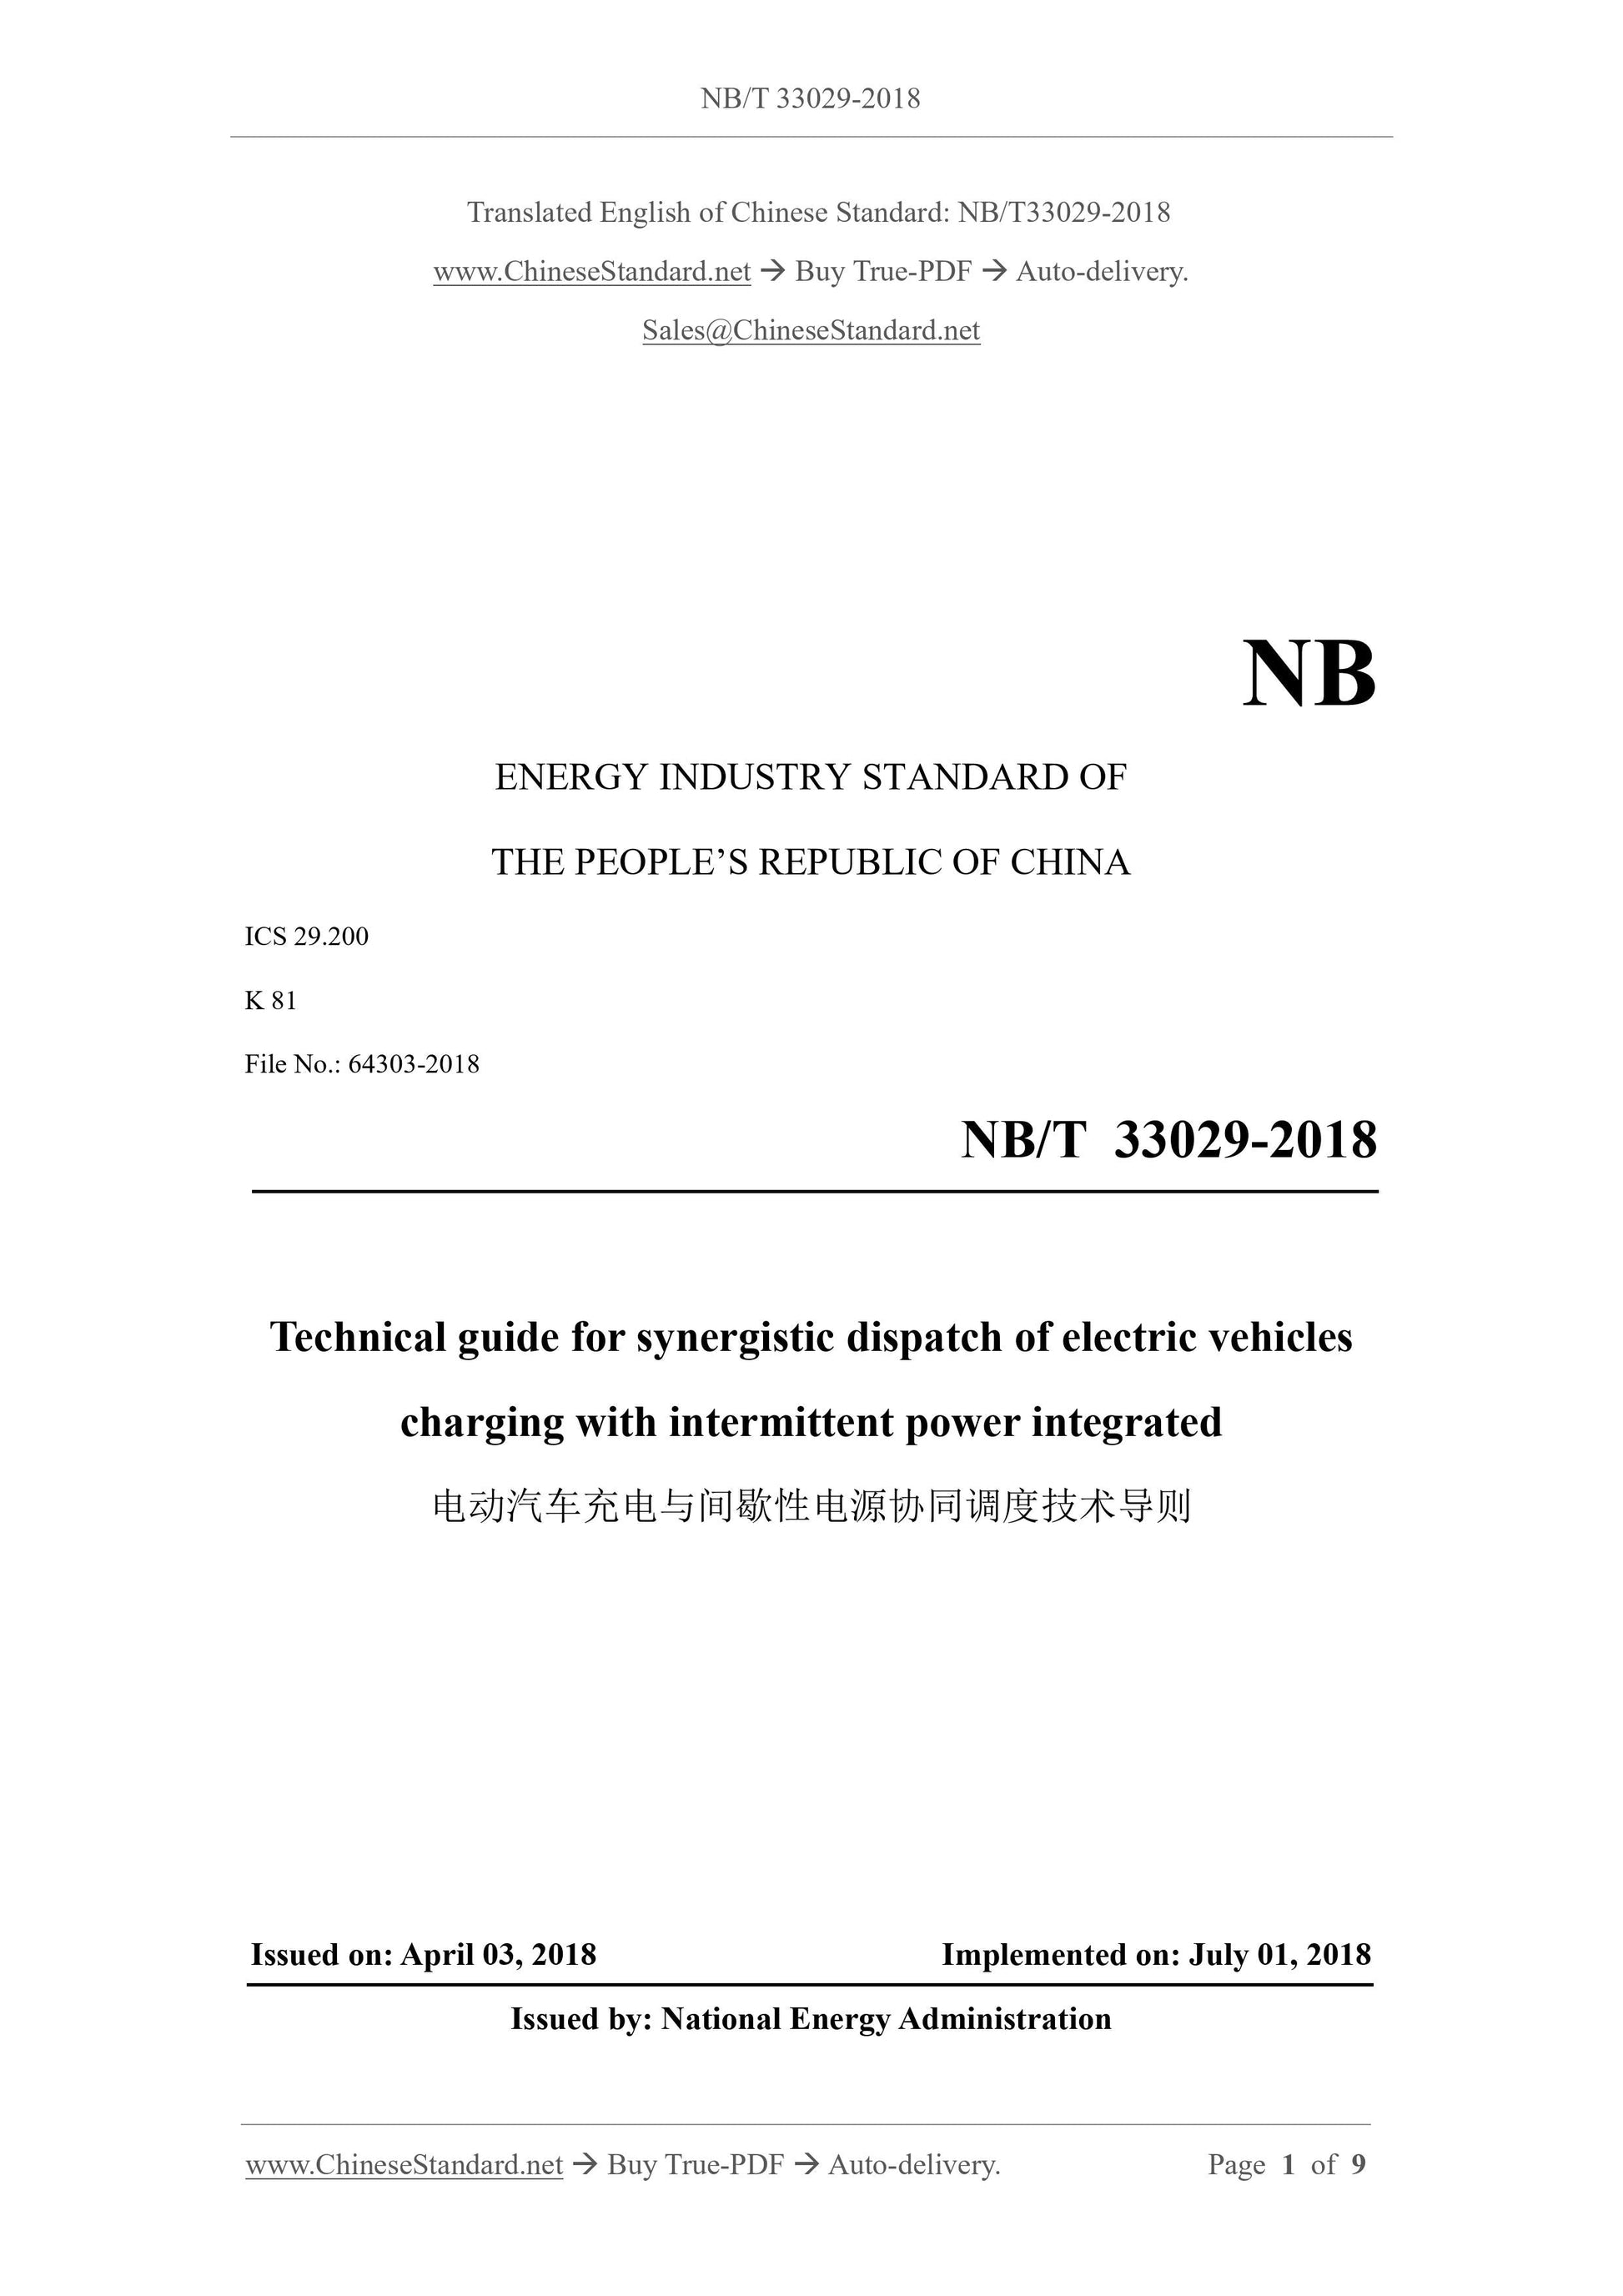 NB/T 33029-2018 Page 1